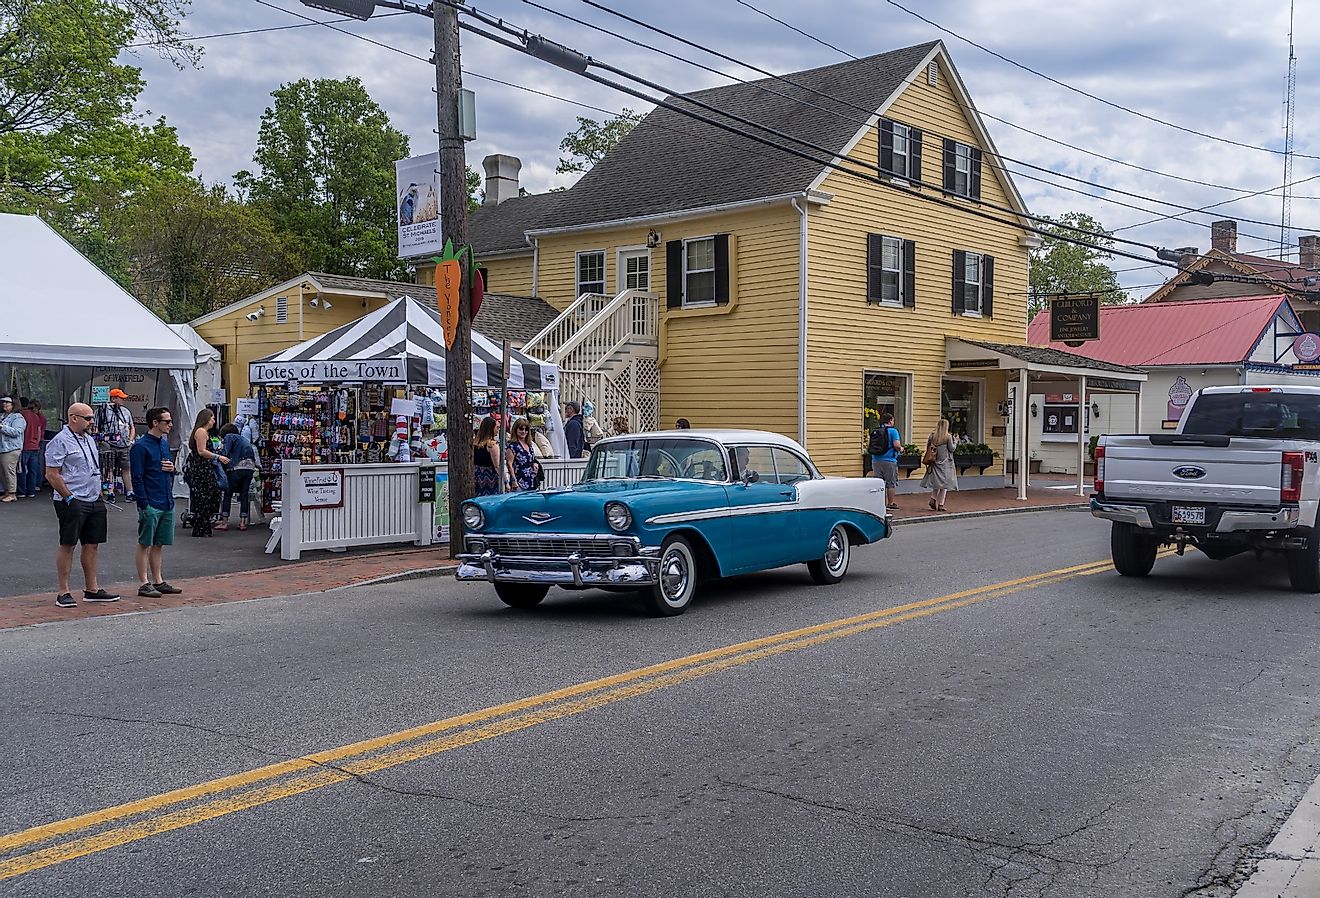 WineFest in St. Michaels, Maryland with busy downtown streets. Image credit tokar via Shutterstock